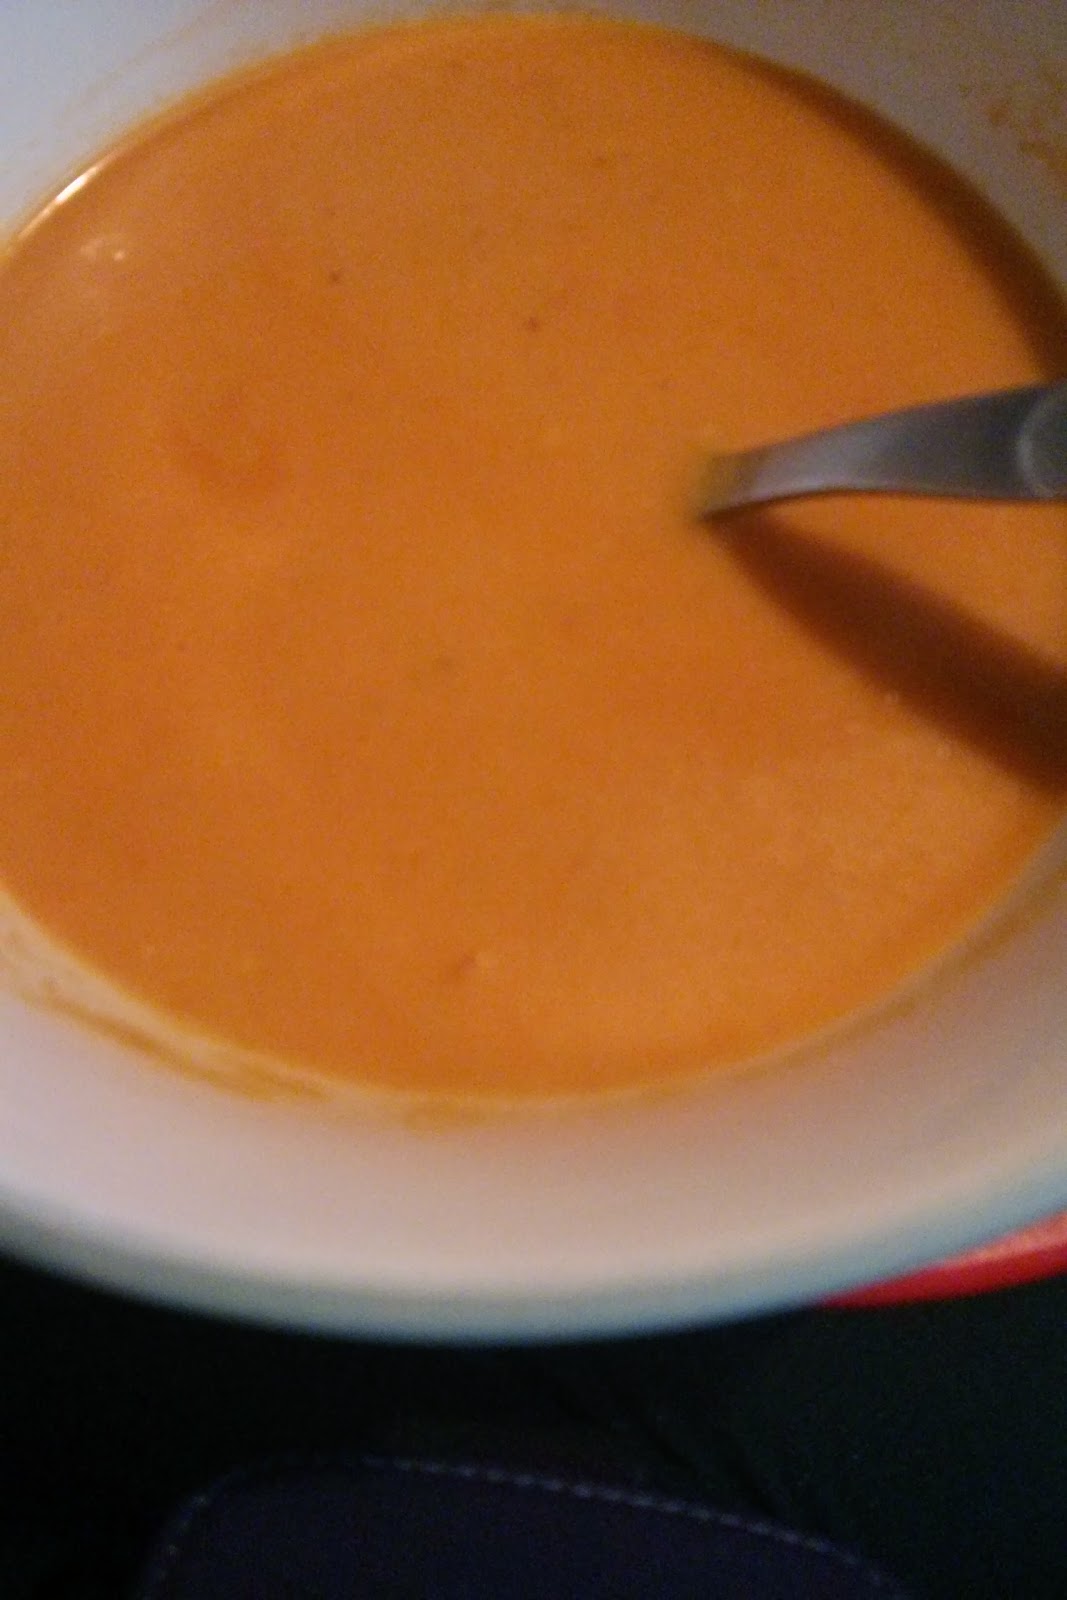 Tomato Soup made in the Morphy Richards Soup Maker